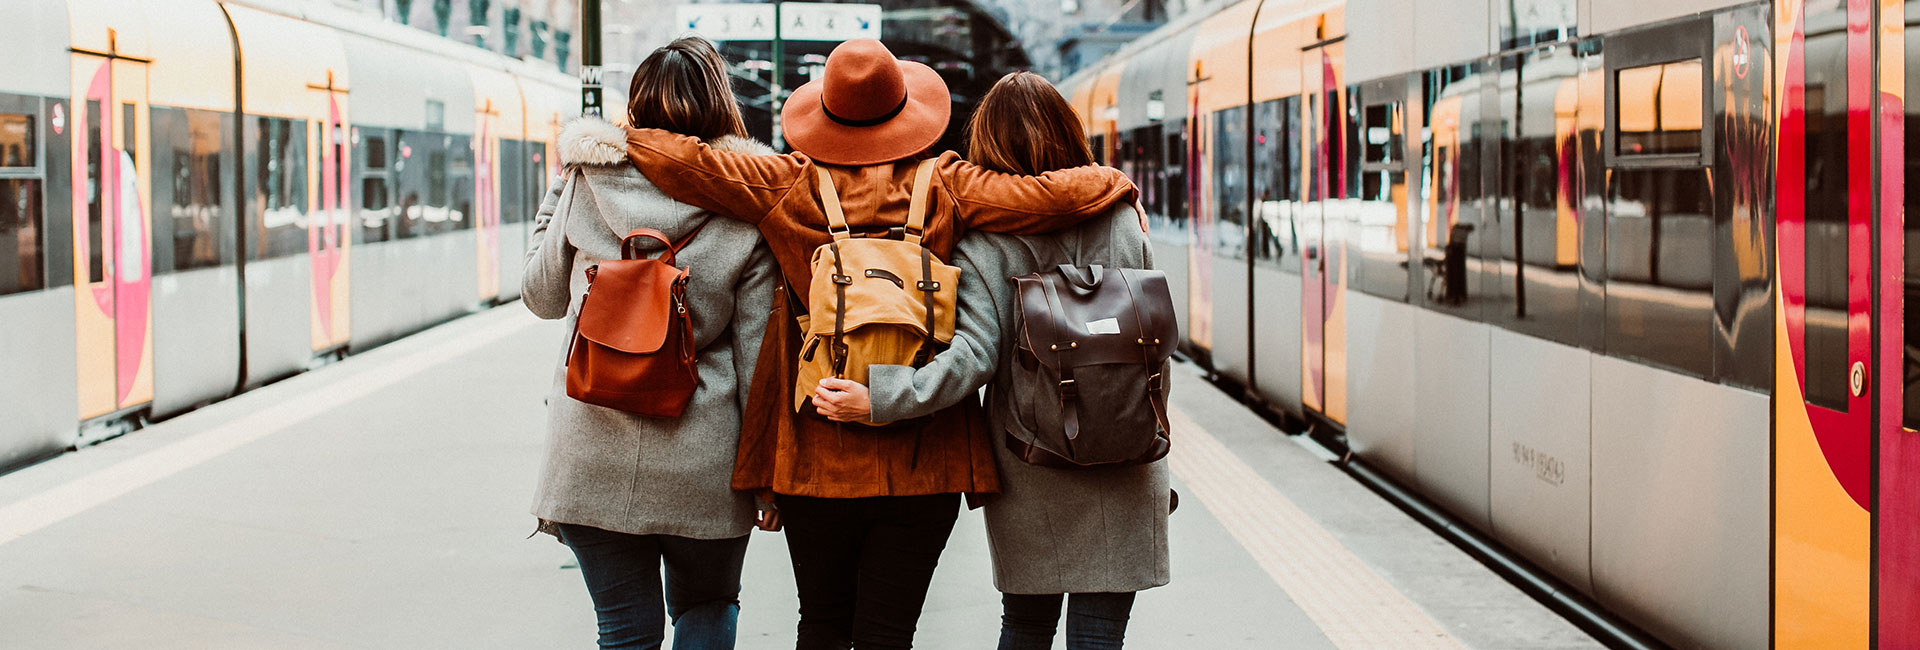 Three female nursing wearing backpacks and embracing while standing near a train station.